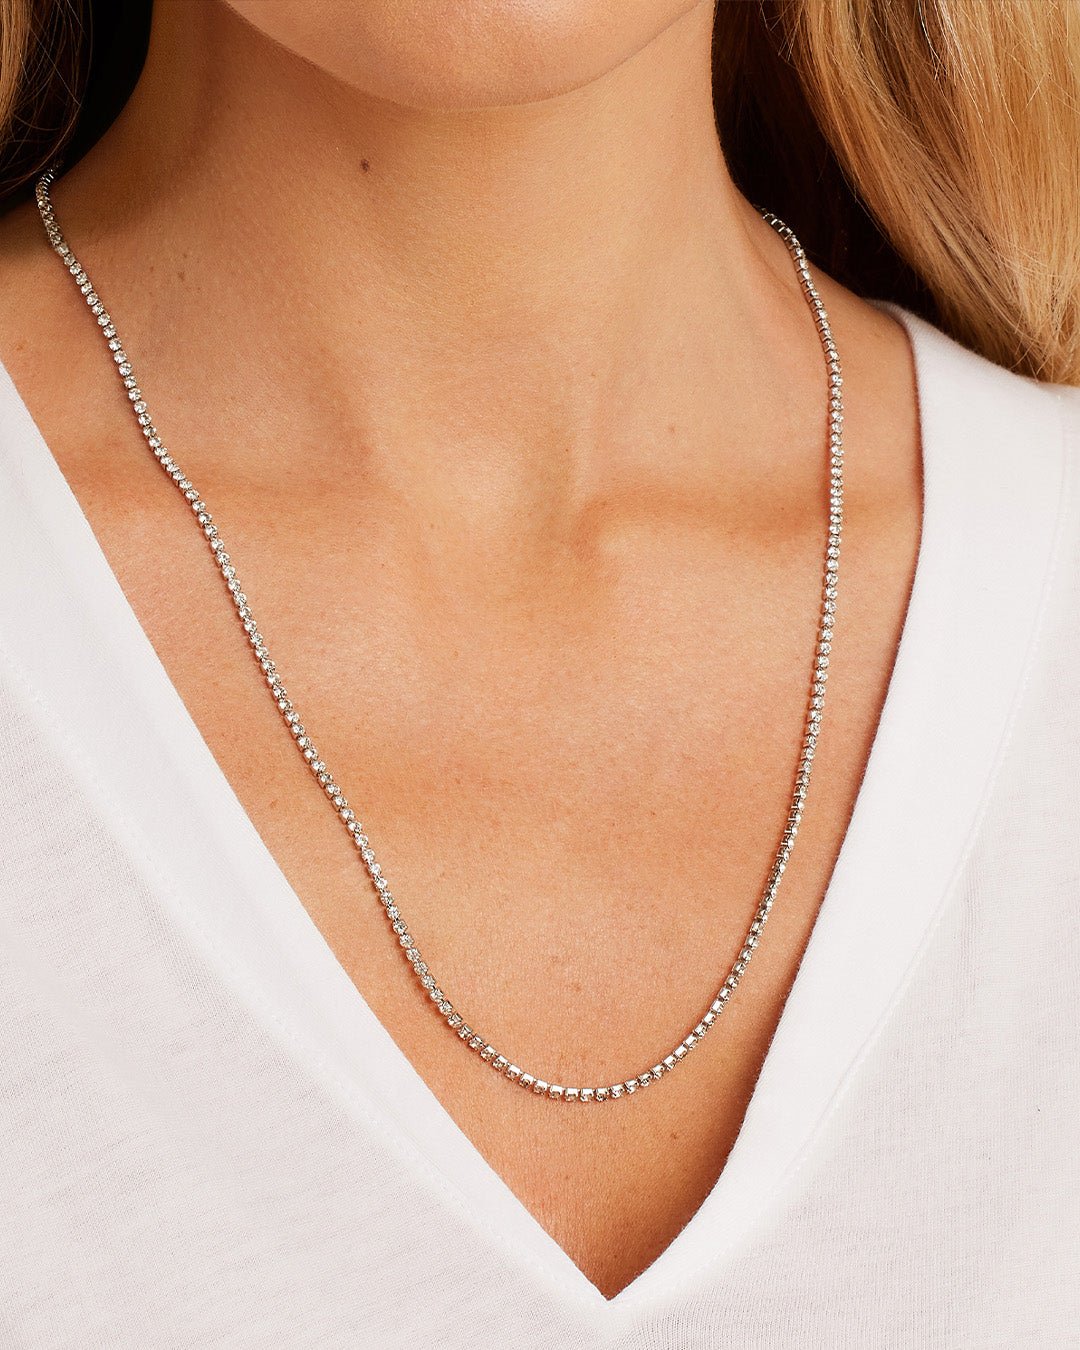  Lexi Long Necklace || option::Rhodium Plated